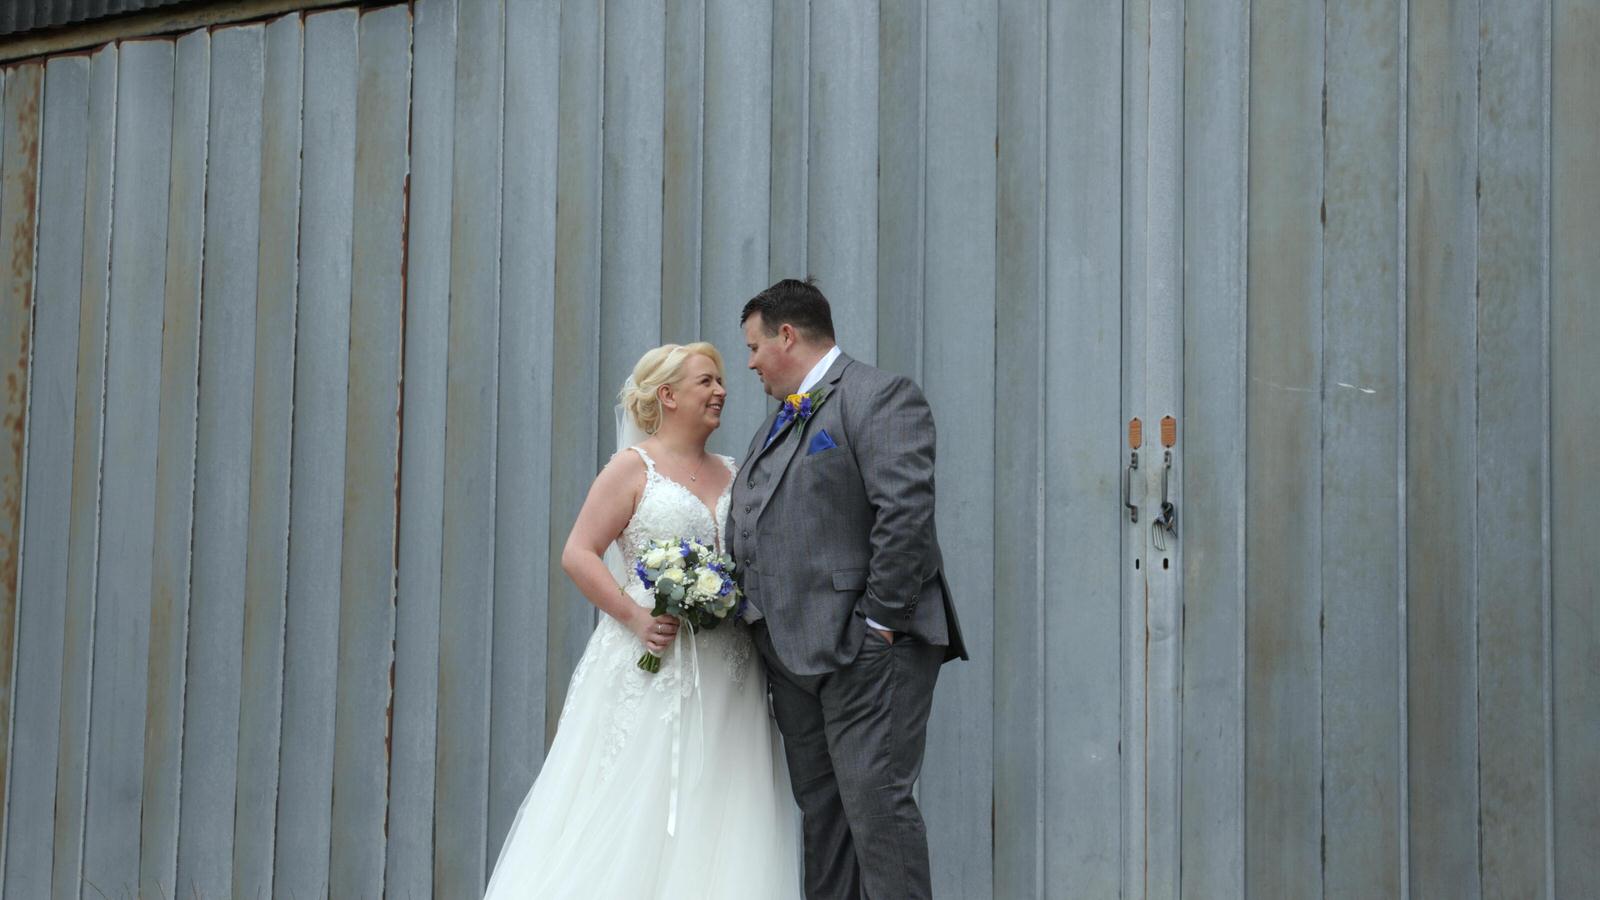 relaxed video of couple by air hangar at Beeston Manor